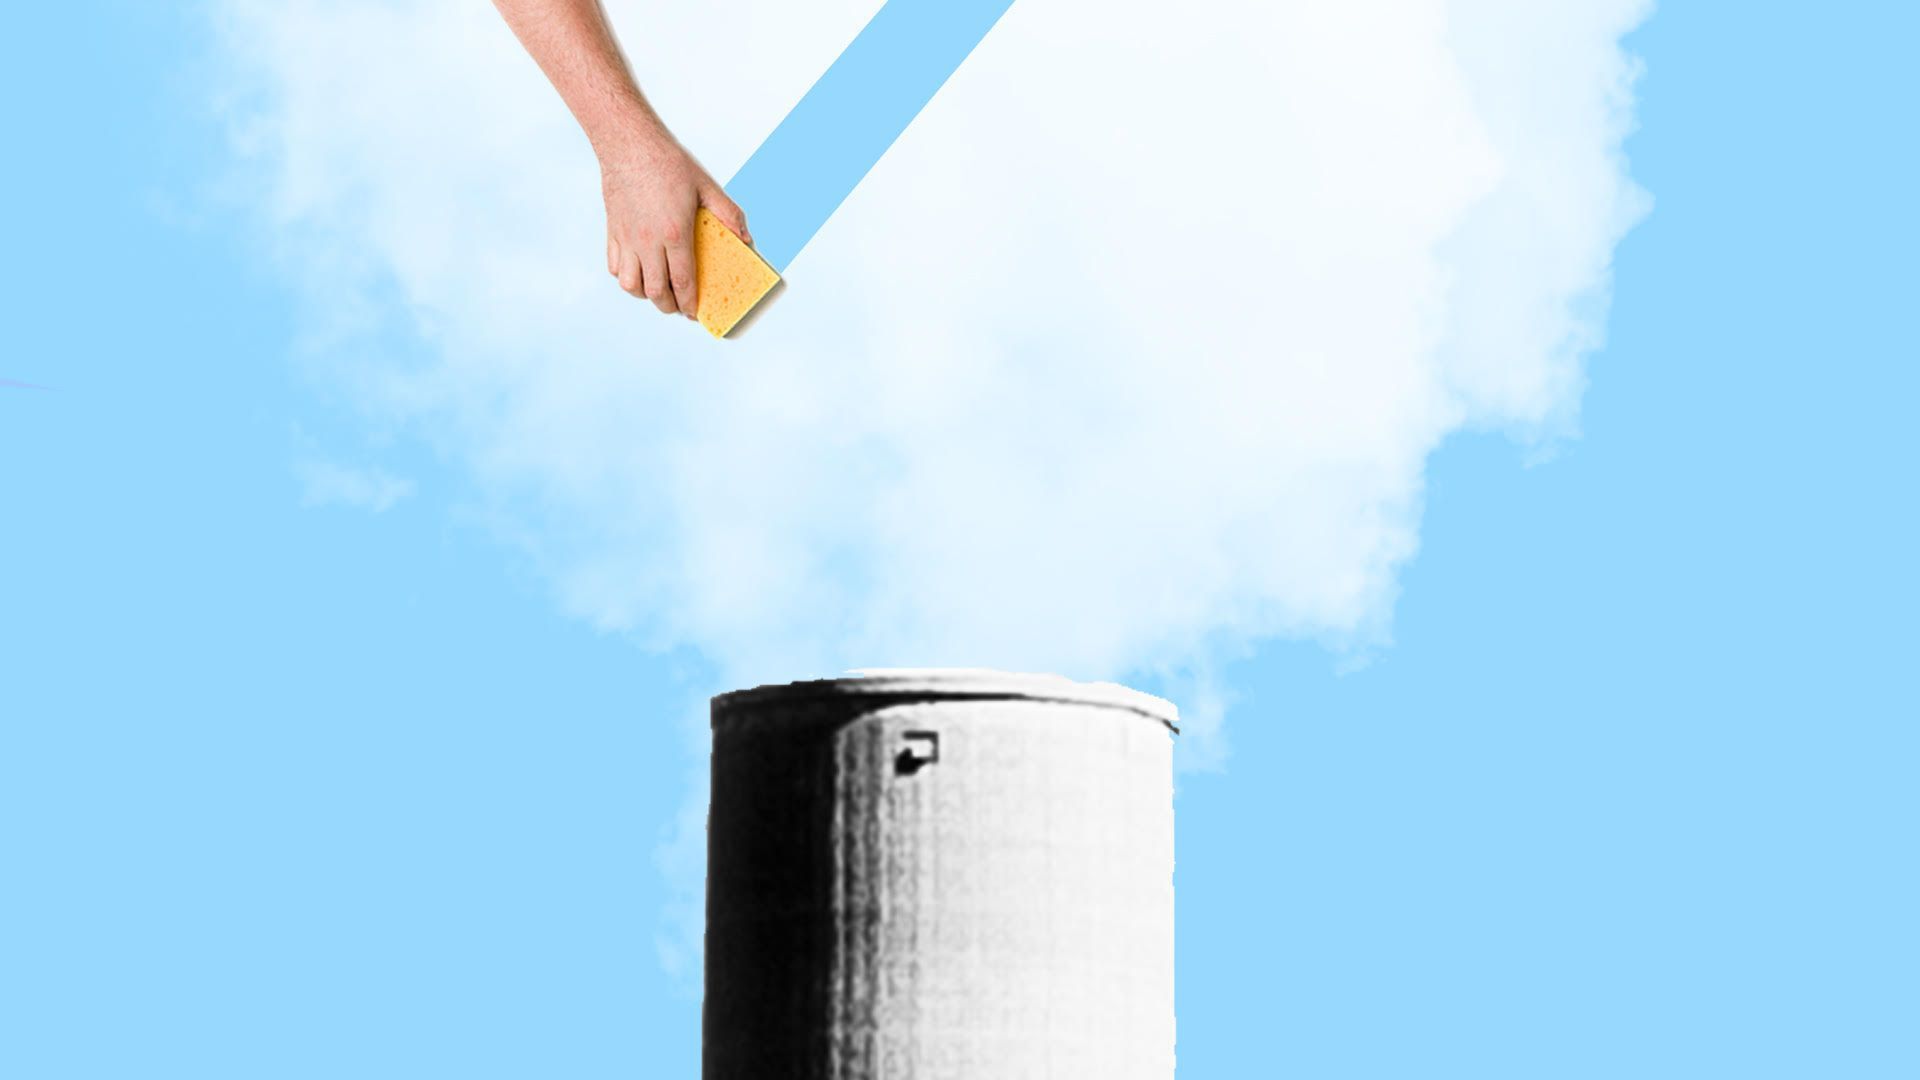 Illustration for carbon removal story